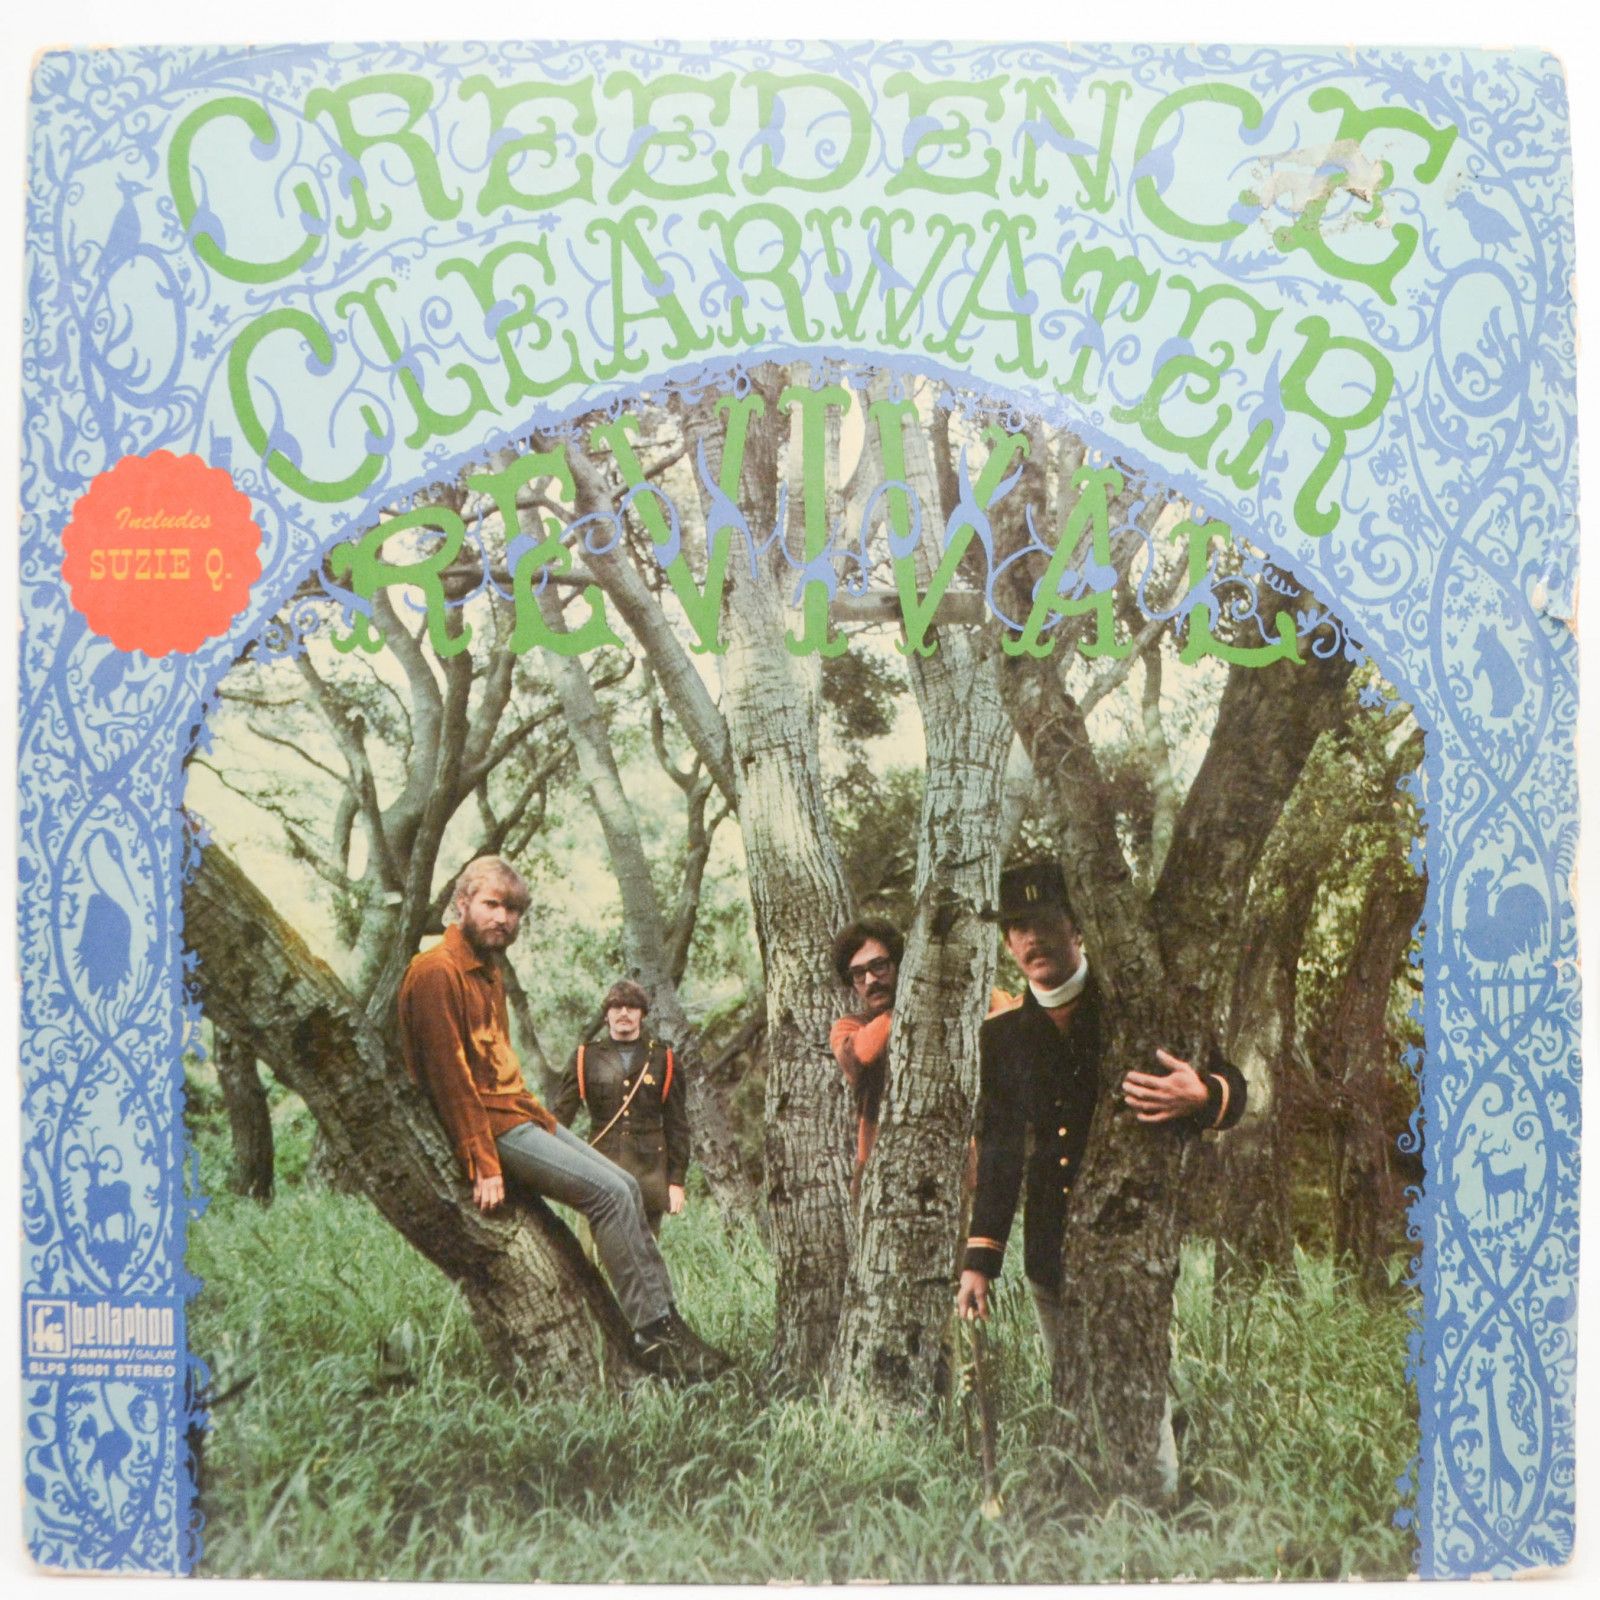 Creedence Clearwater Revival — Creedence Clearwater Revival, 1969